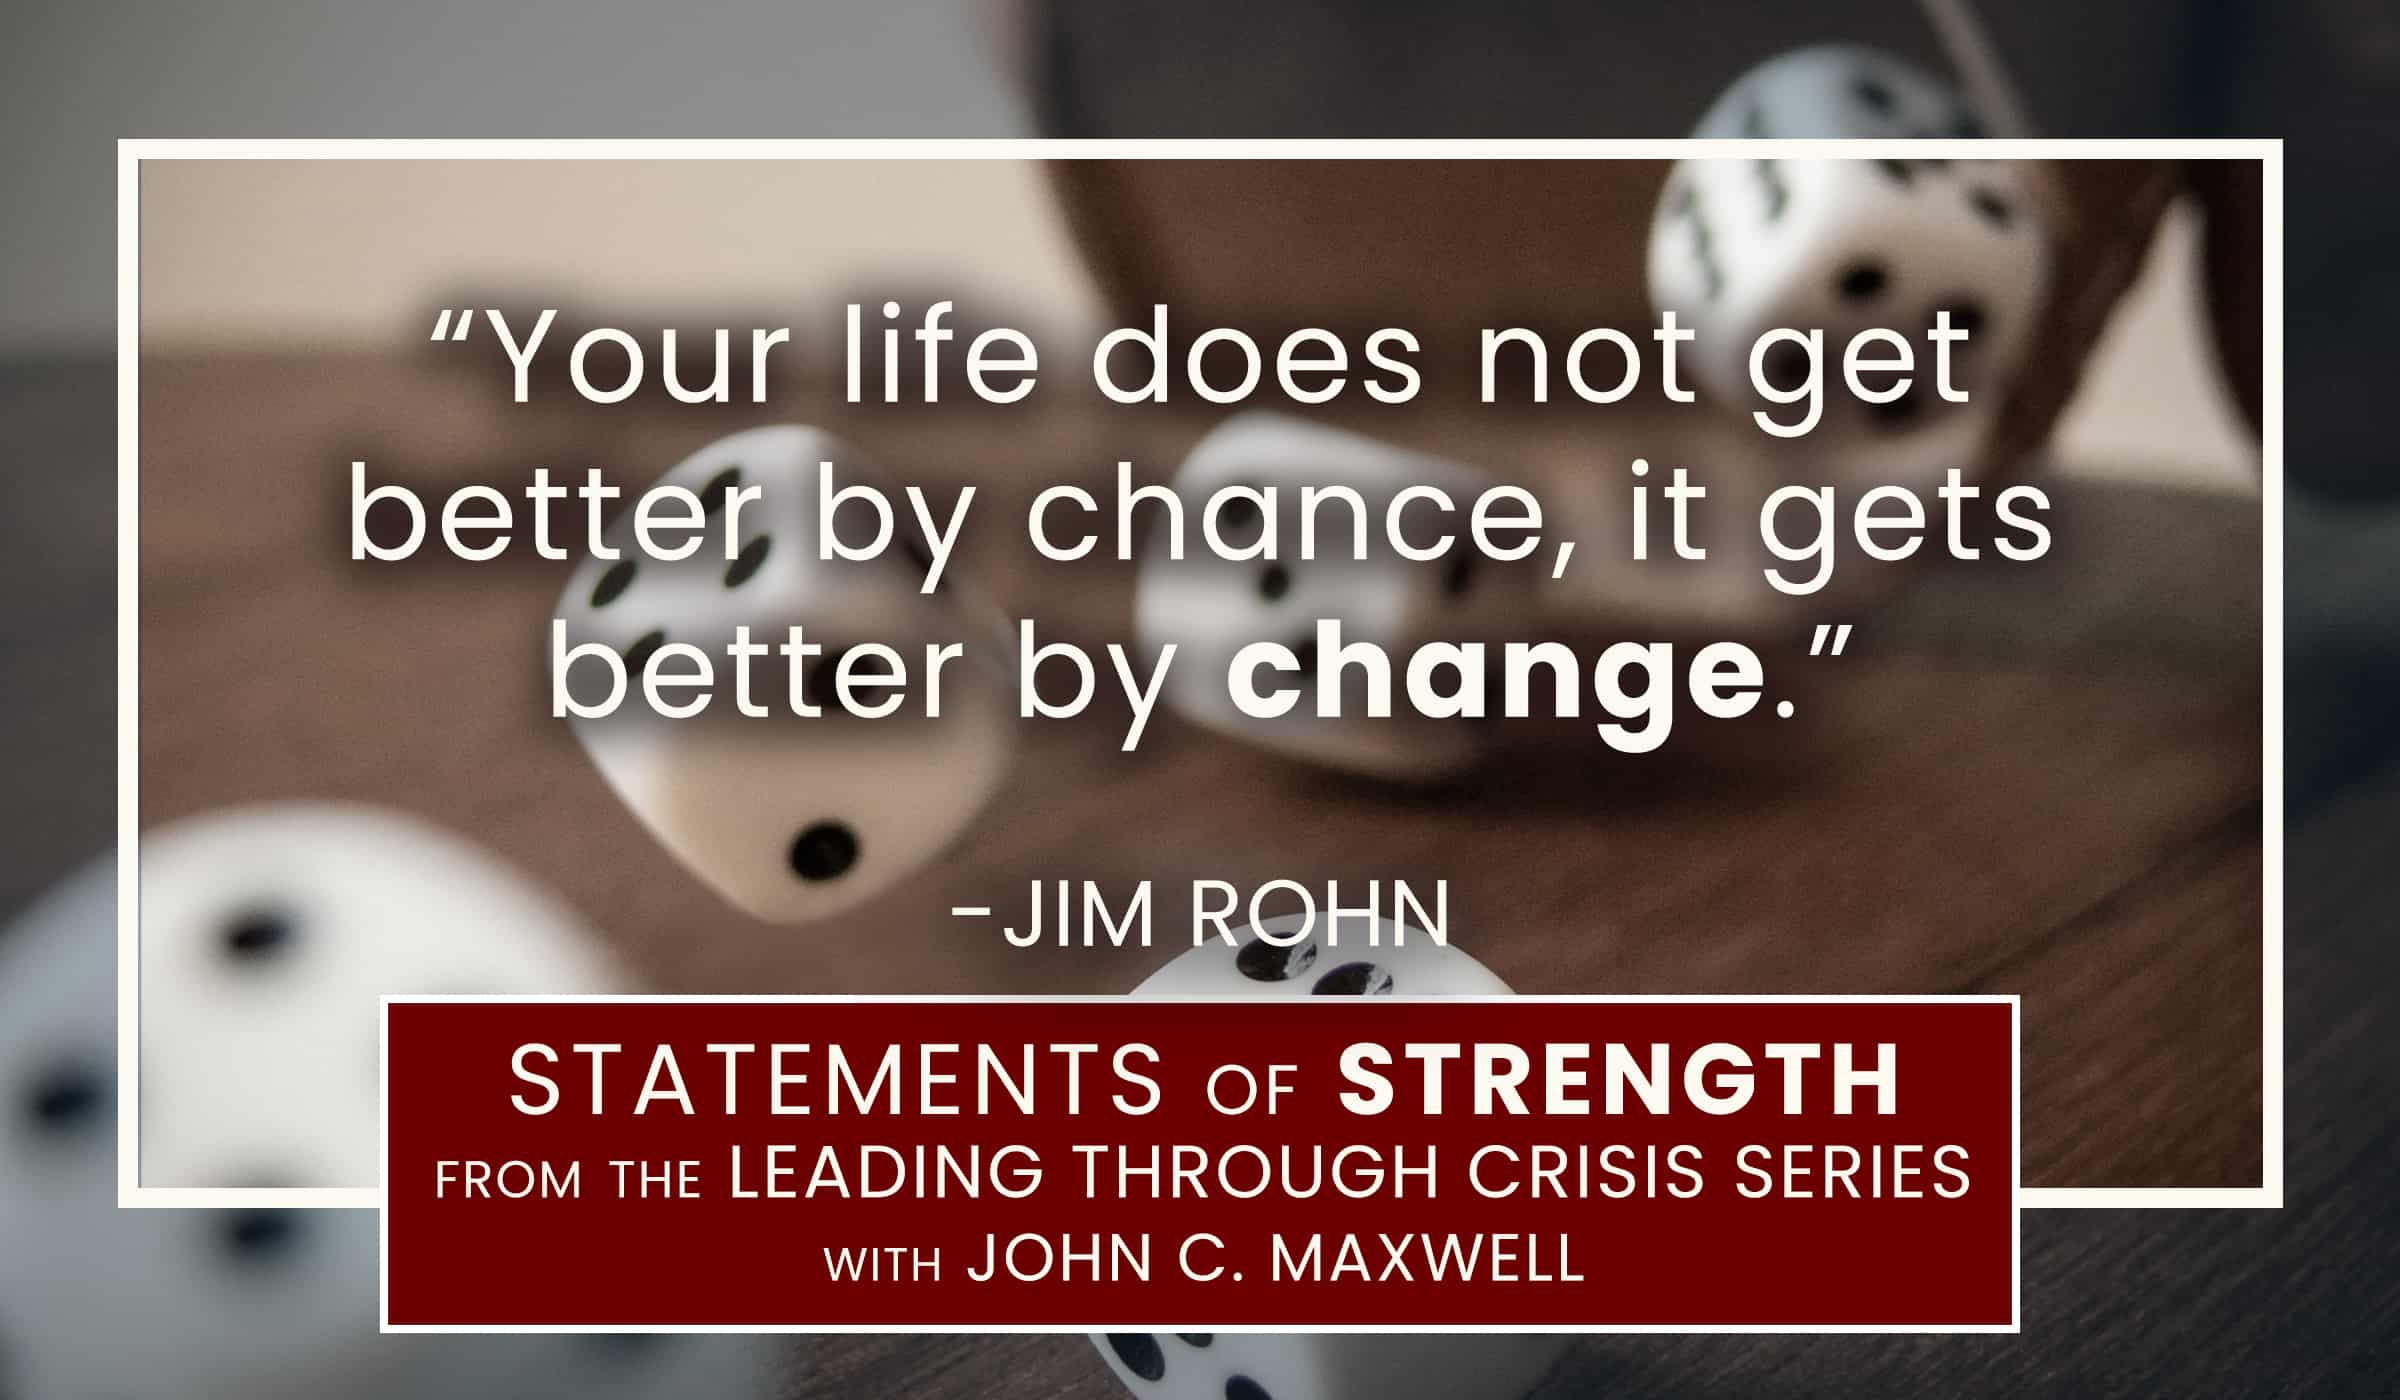 image of quote from Jim Rohn